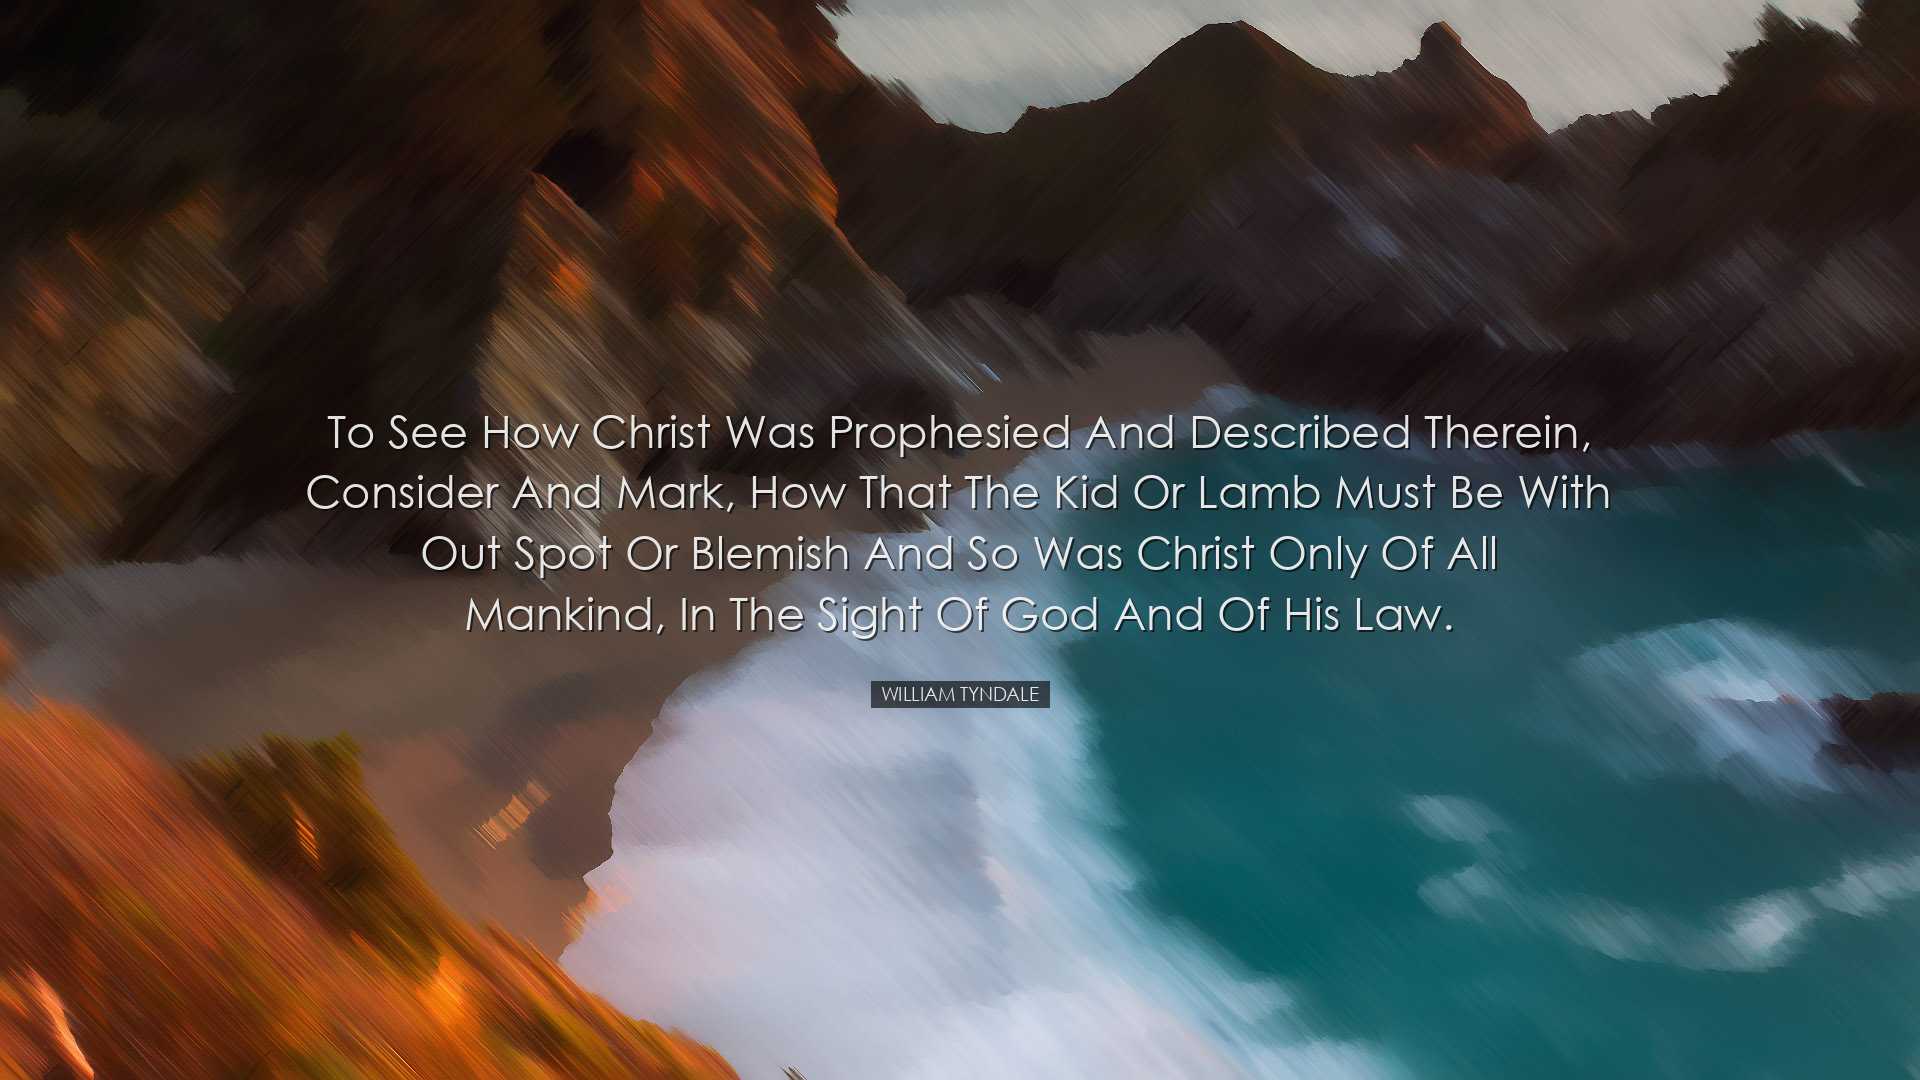 To see how Christ was prophesied and described therein, consider a